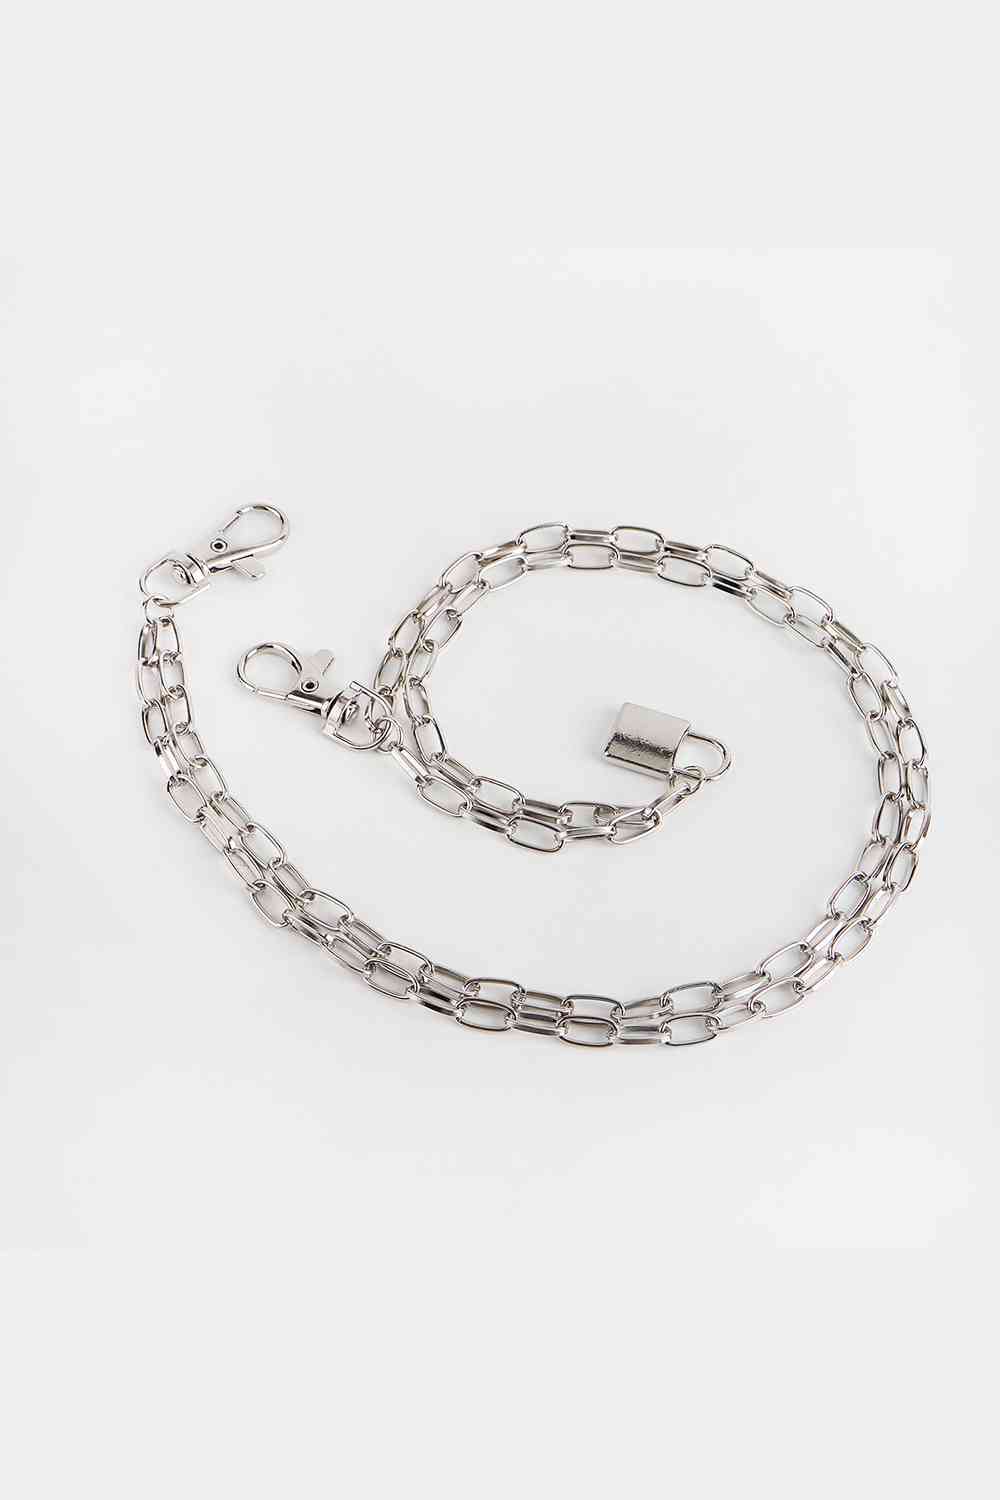 Double Layered Iron Chain Belt with Lock Charm